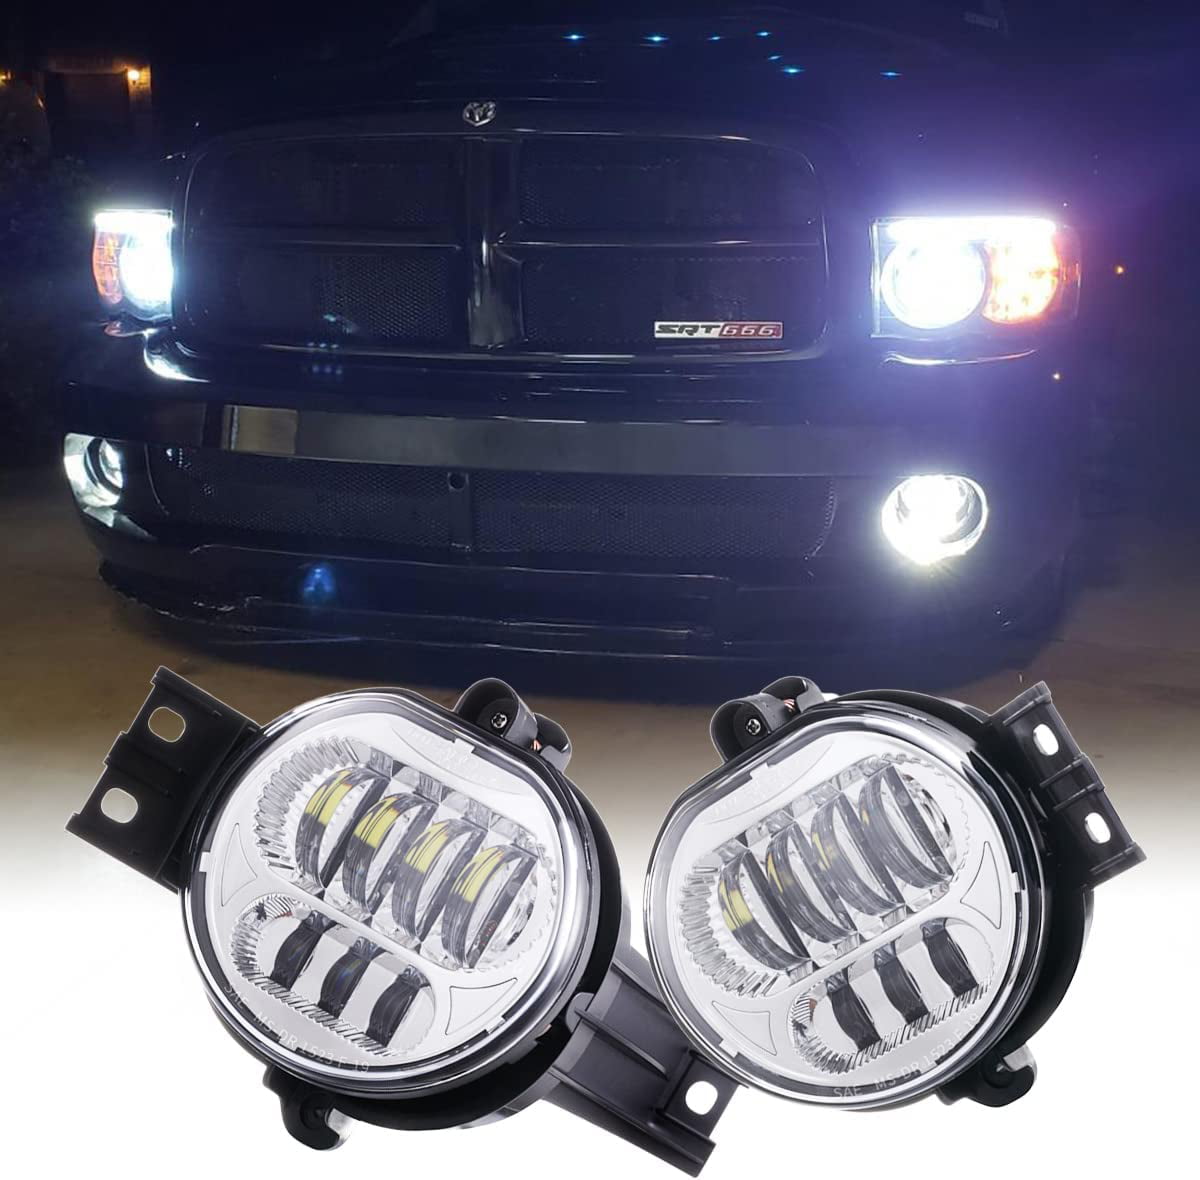 Aftermarket Replacement Passenger Fog Light Compatible with 2004-2006 Silverado Avalanche Pickup Truck 15791434 